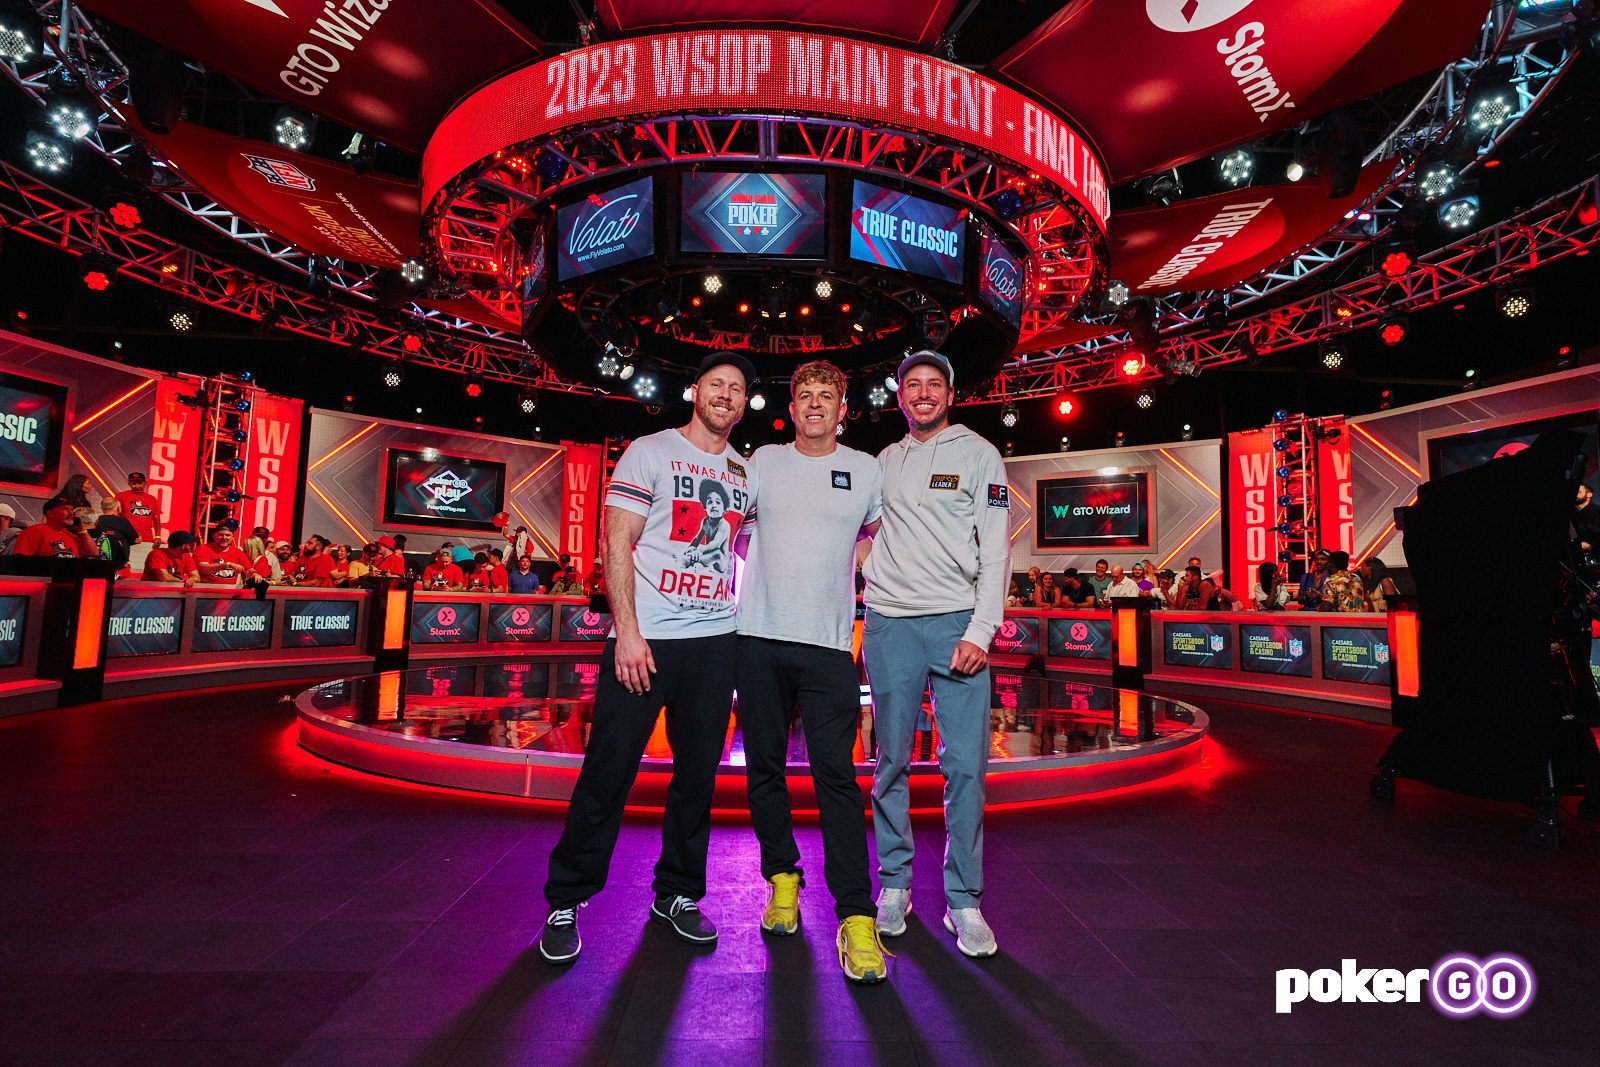 And then there were three... Steven Jones, Daniel Weinman, Adam Walton to battle for the 2023 WSOP Main Event title; Jason Clarke wins 30 years free Main Event entry